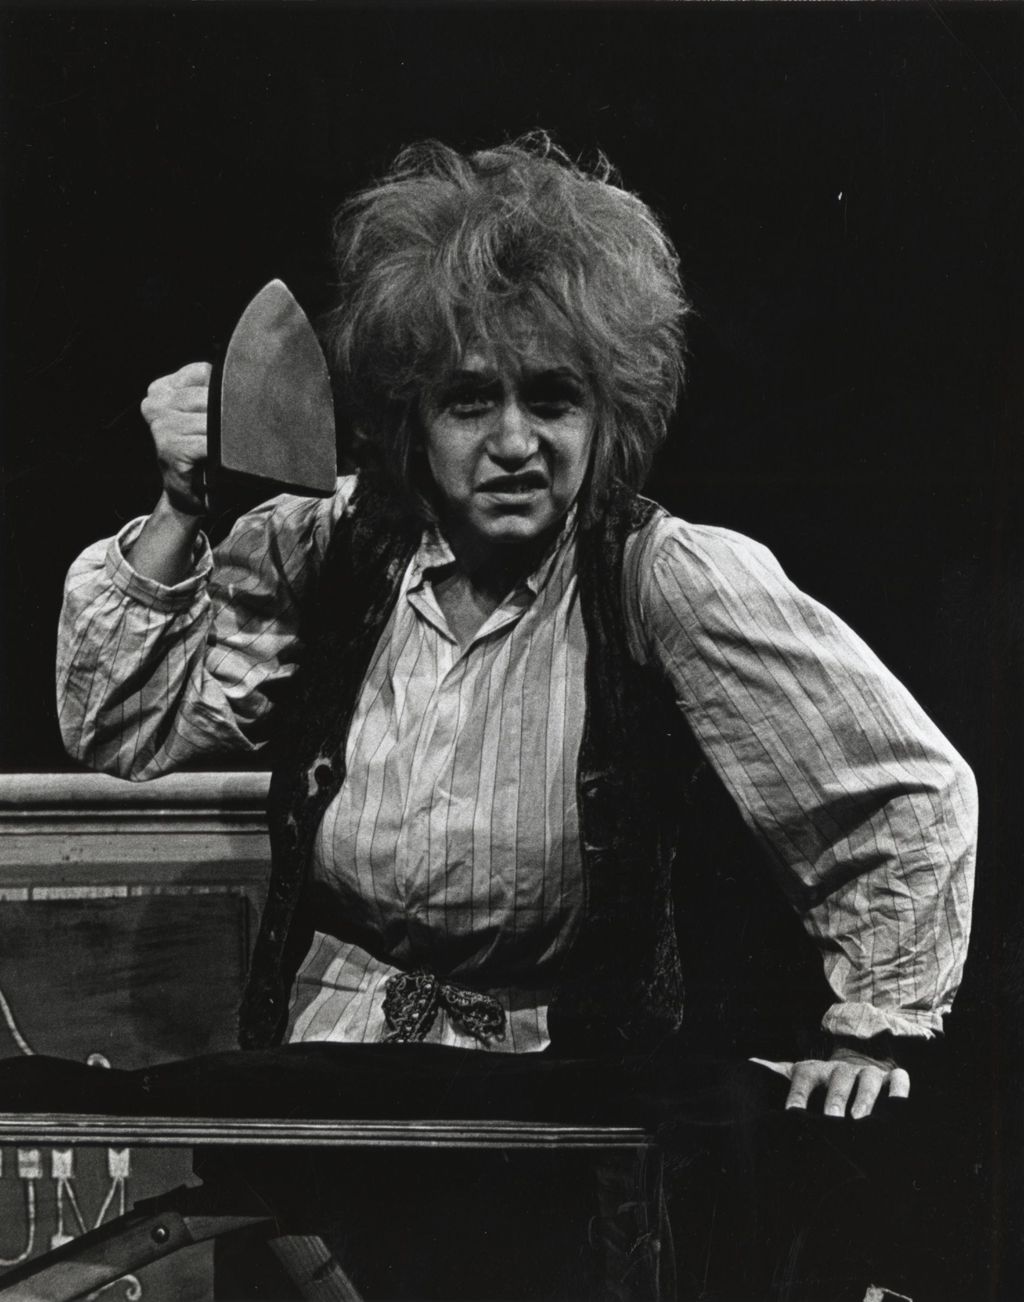 Miniature of Barbara Eskin on stage in a production of "The Threepenny Opera" at Hull-House Theater